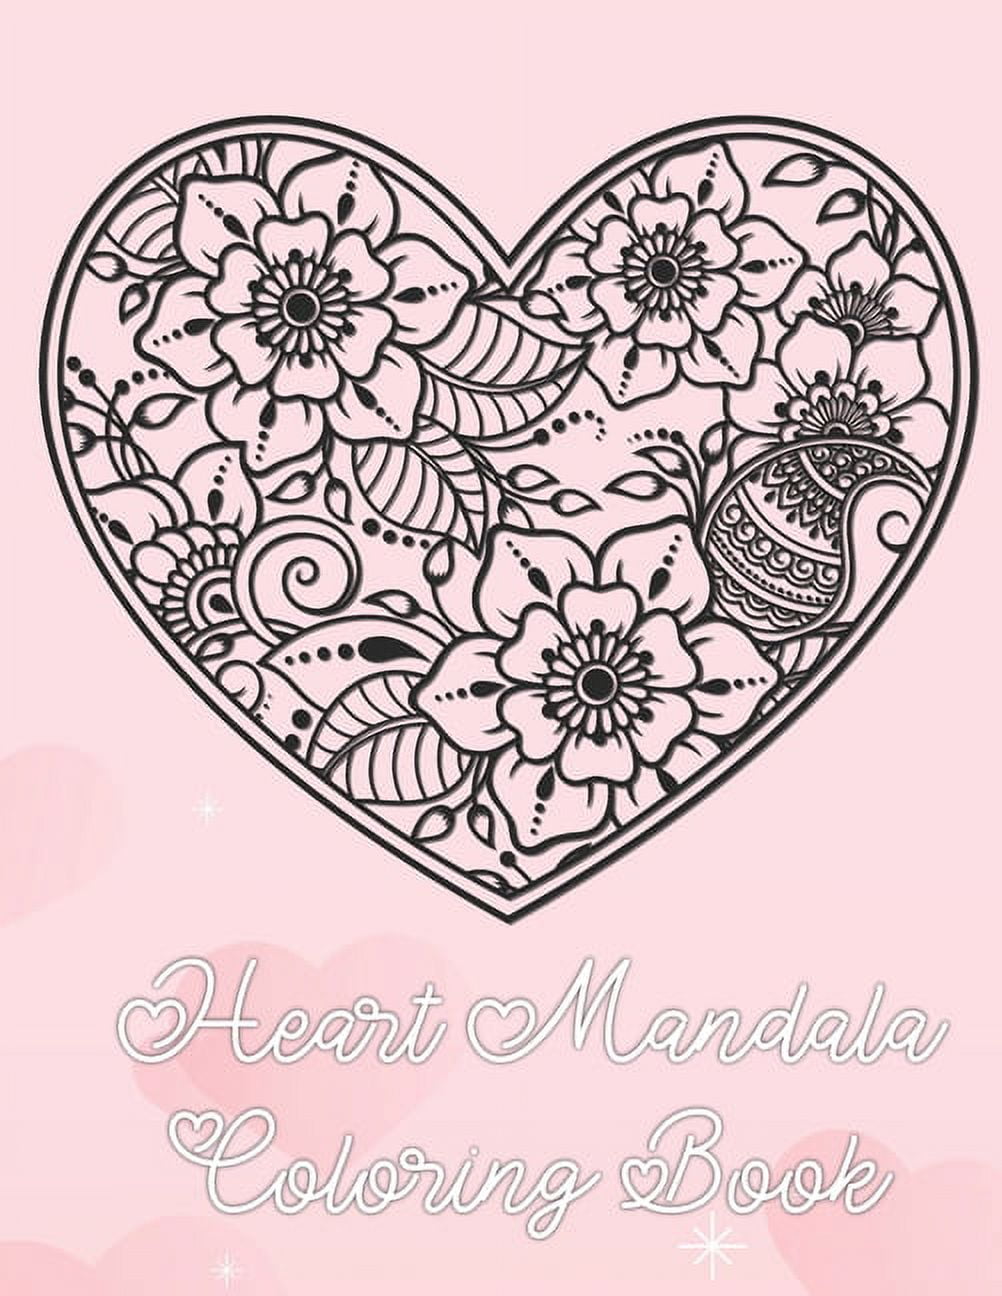 Coloring Book: Mindful Coloring for Teens and Adults (8x10): Ultimate Heart and Love Designs (50 Unique Pages): Mandala Artwork on Pages - Valentines Day Gift [Book]